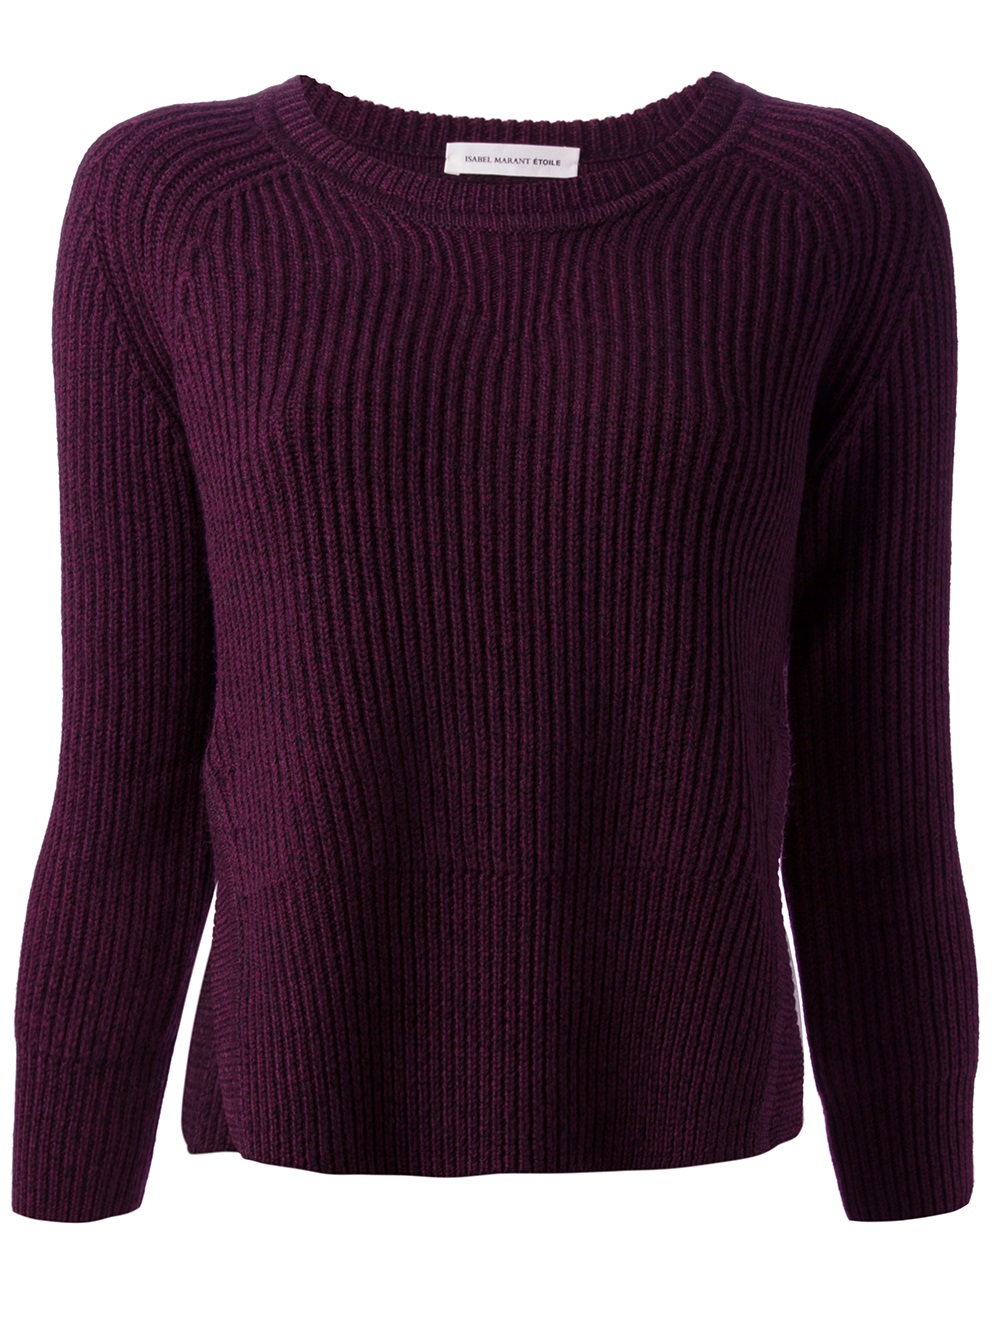 Lyst - Étoile Isabel Marant Ribbed Sweater in Purple